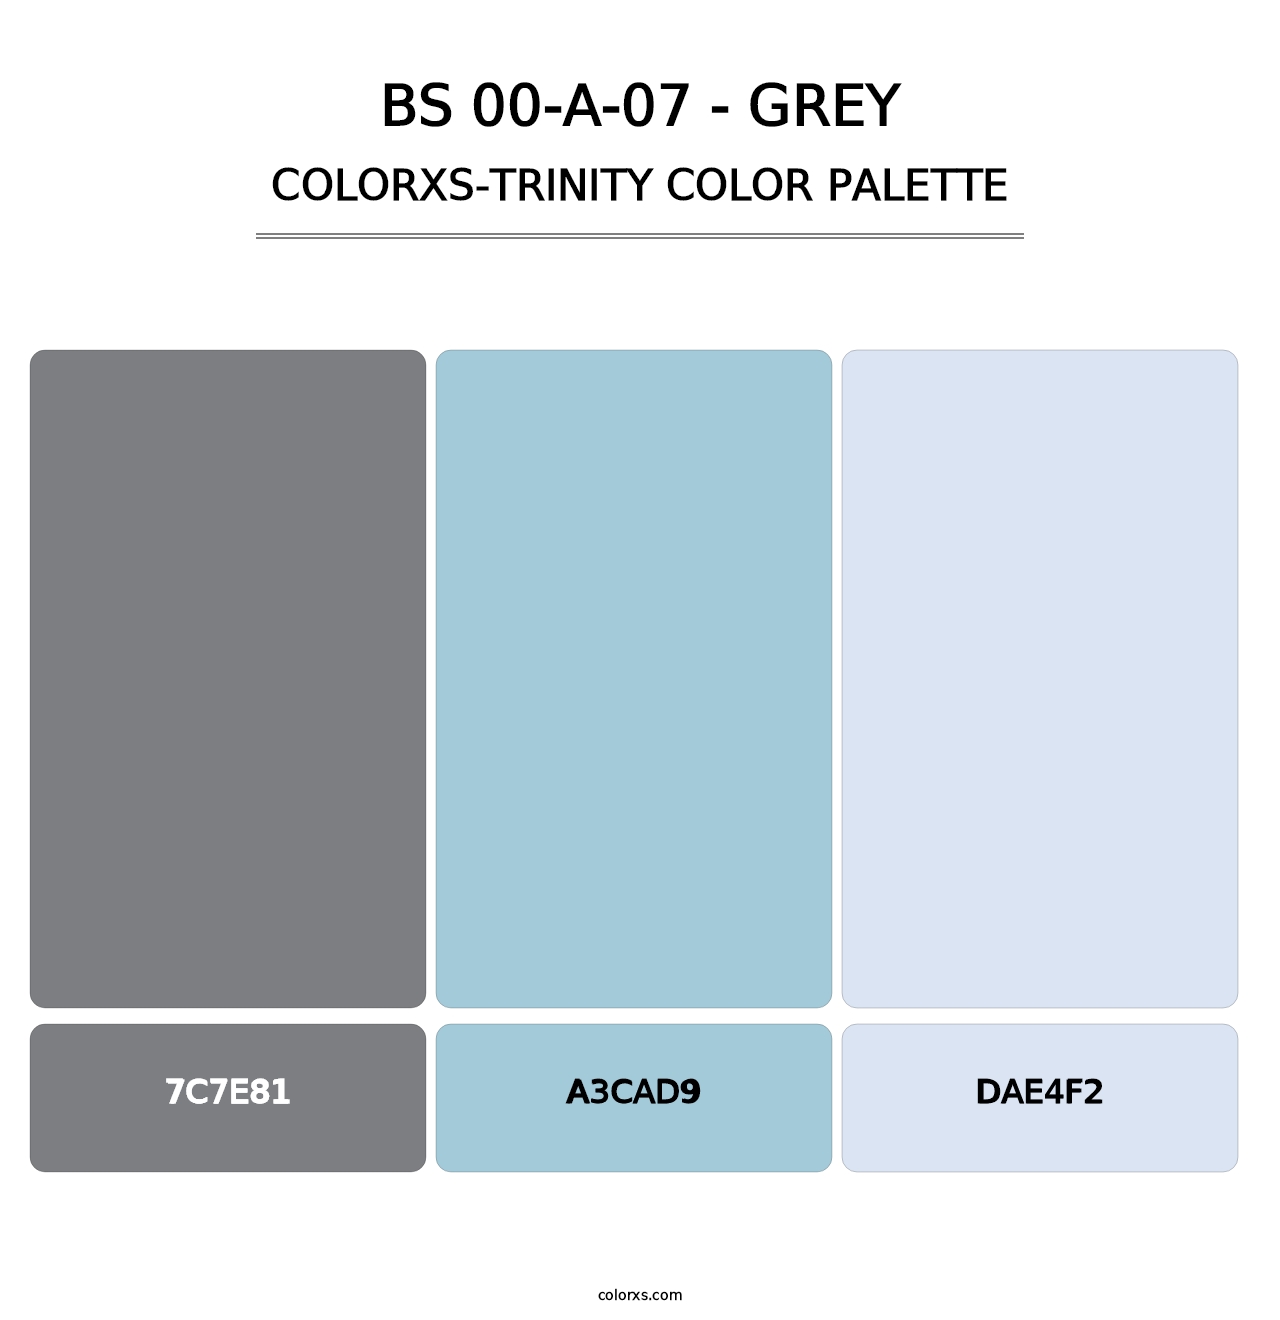 BS 00-A-07 - Grey - Colorxs Trinity Palette